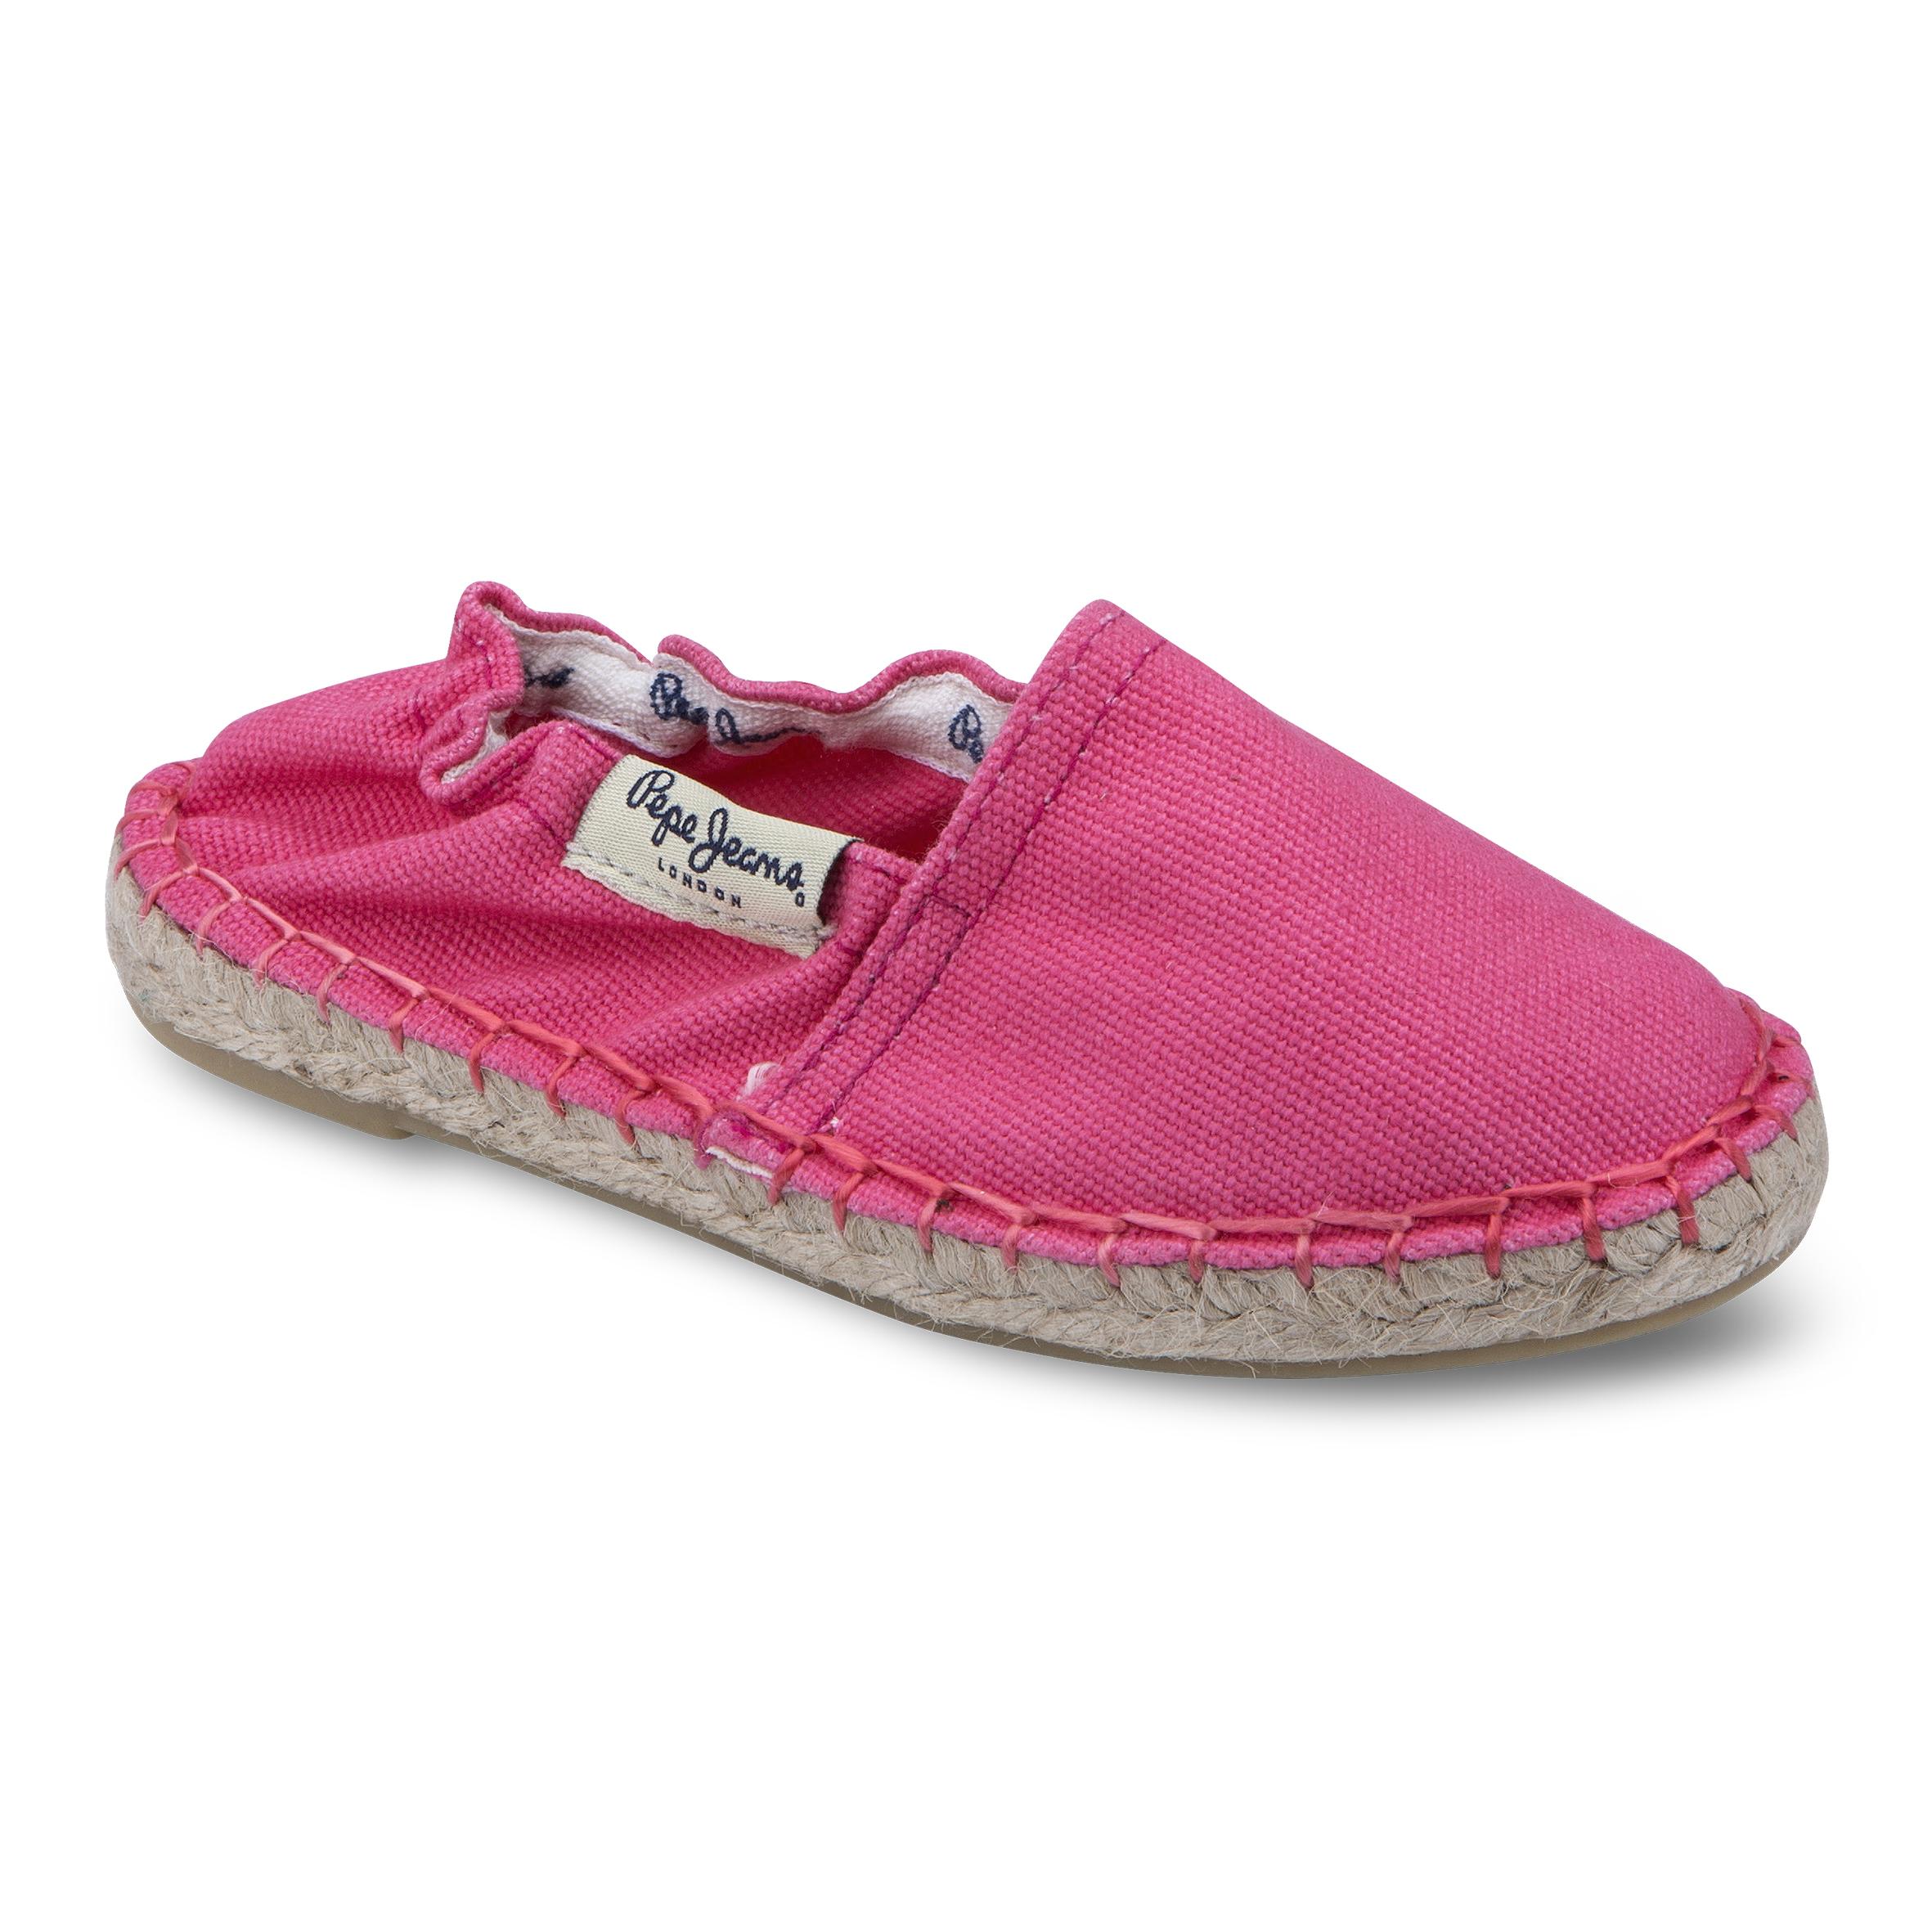 Chaussures confortables - Pepe Jeans - 32€